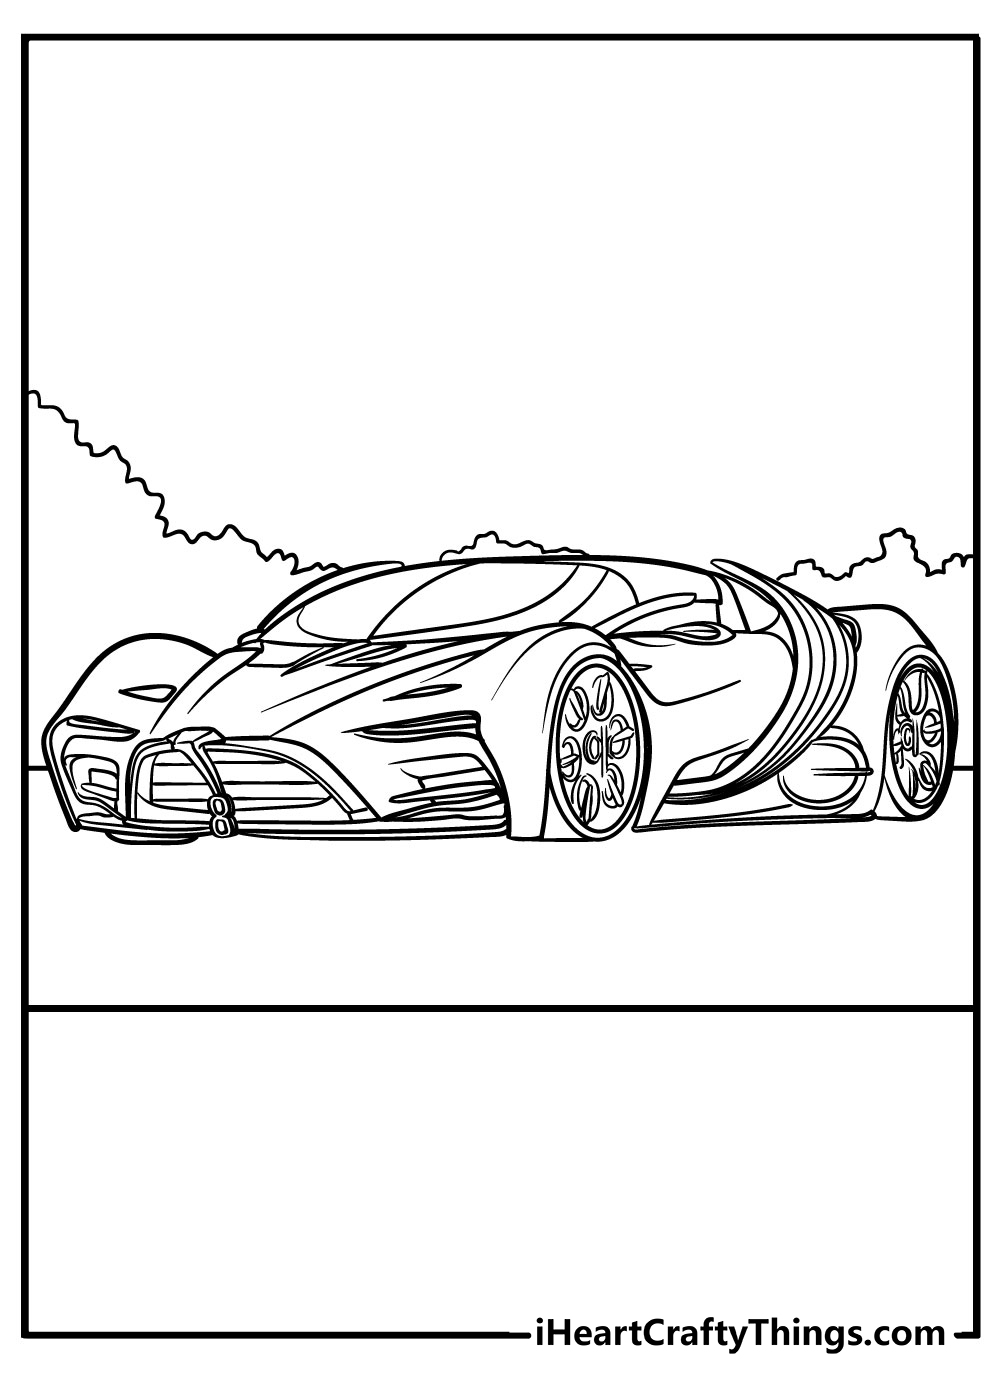 Super Cars Coloring Pages free download